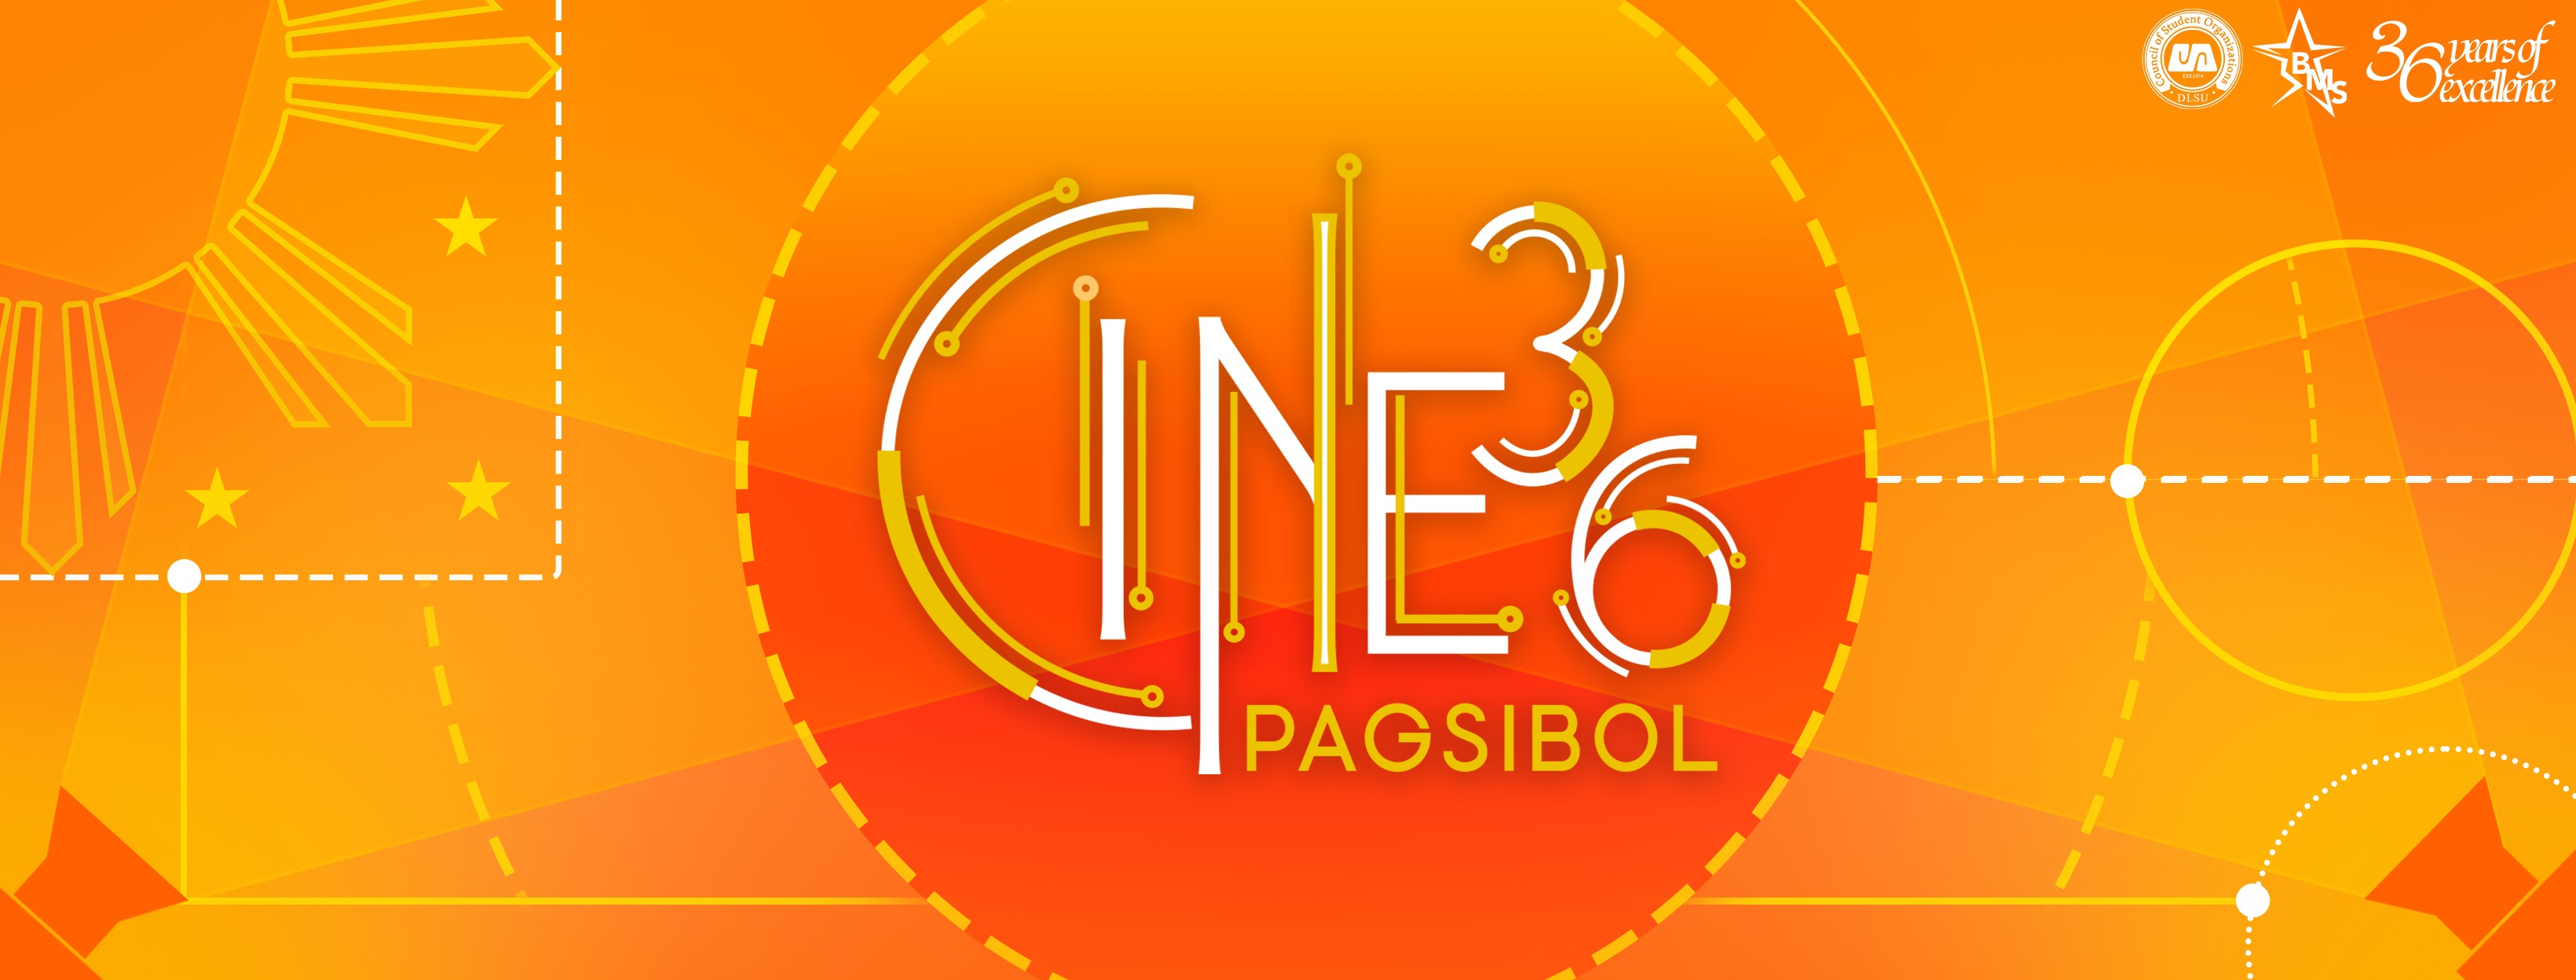 Banner Taken From The Cine 36: Pagsibol Facebook Cover Photo